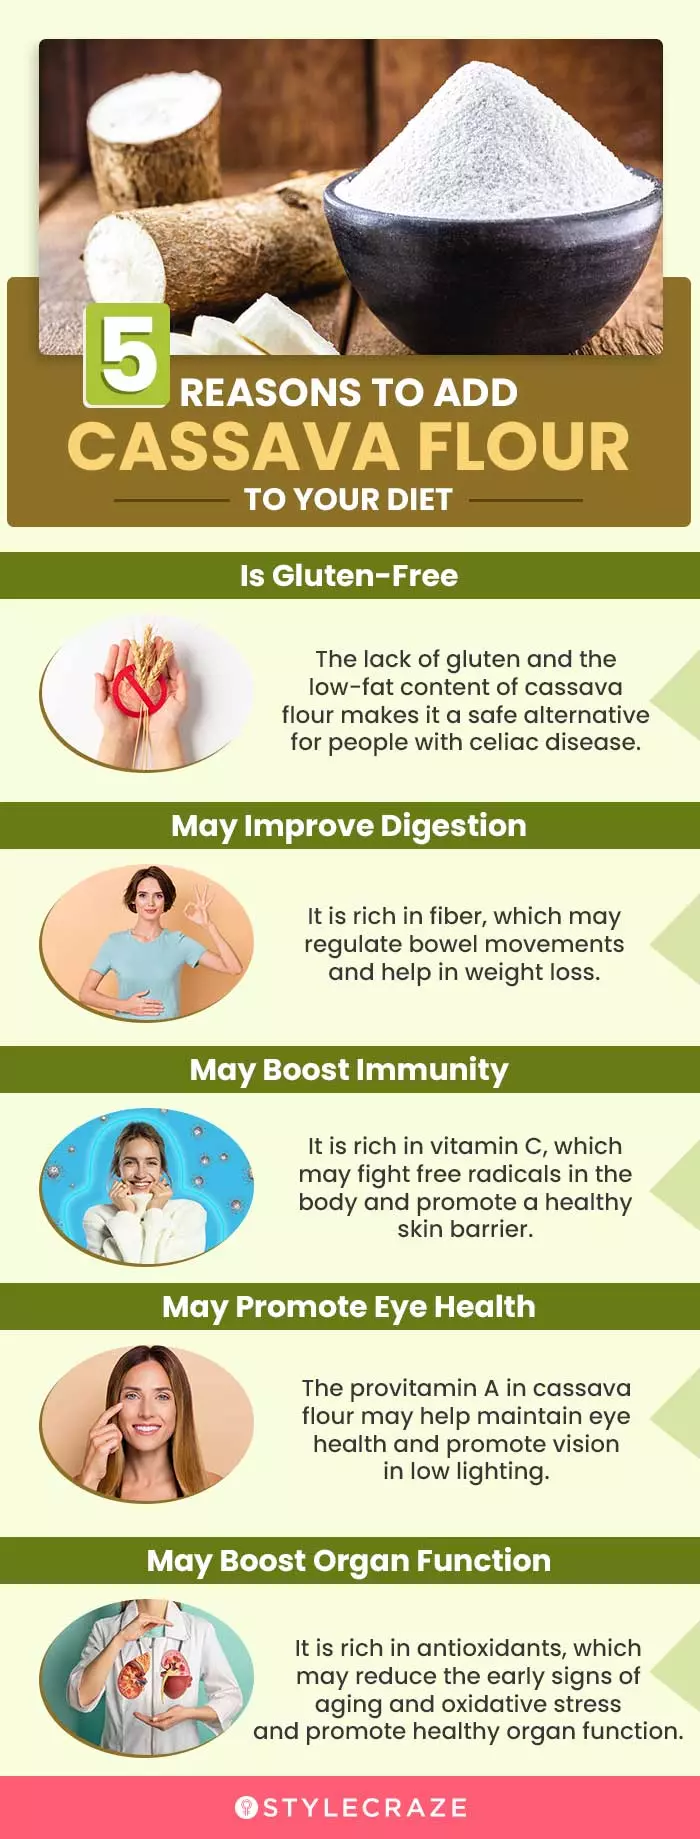 5 reasons to add cassava flour to your diet (infographic)